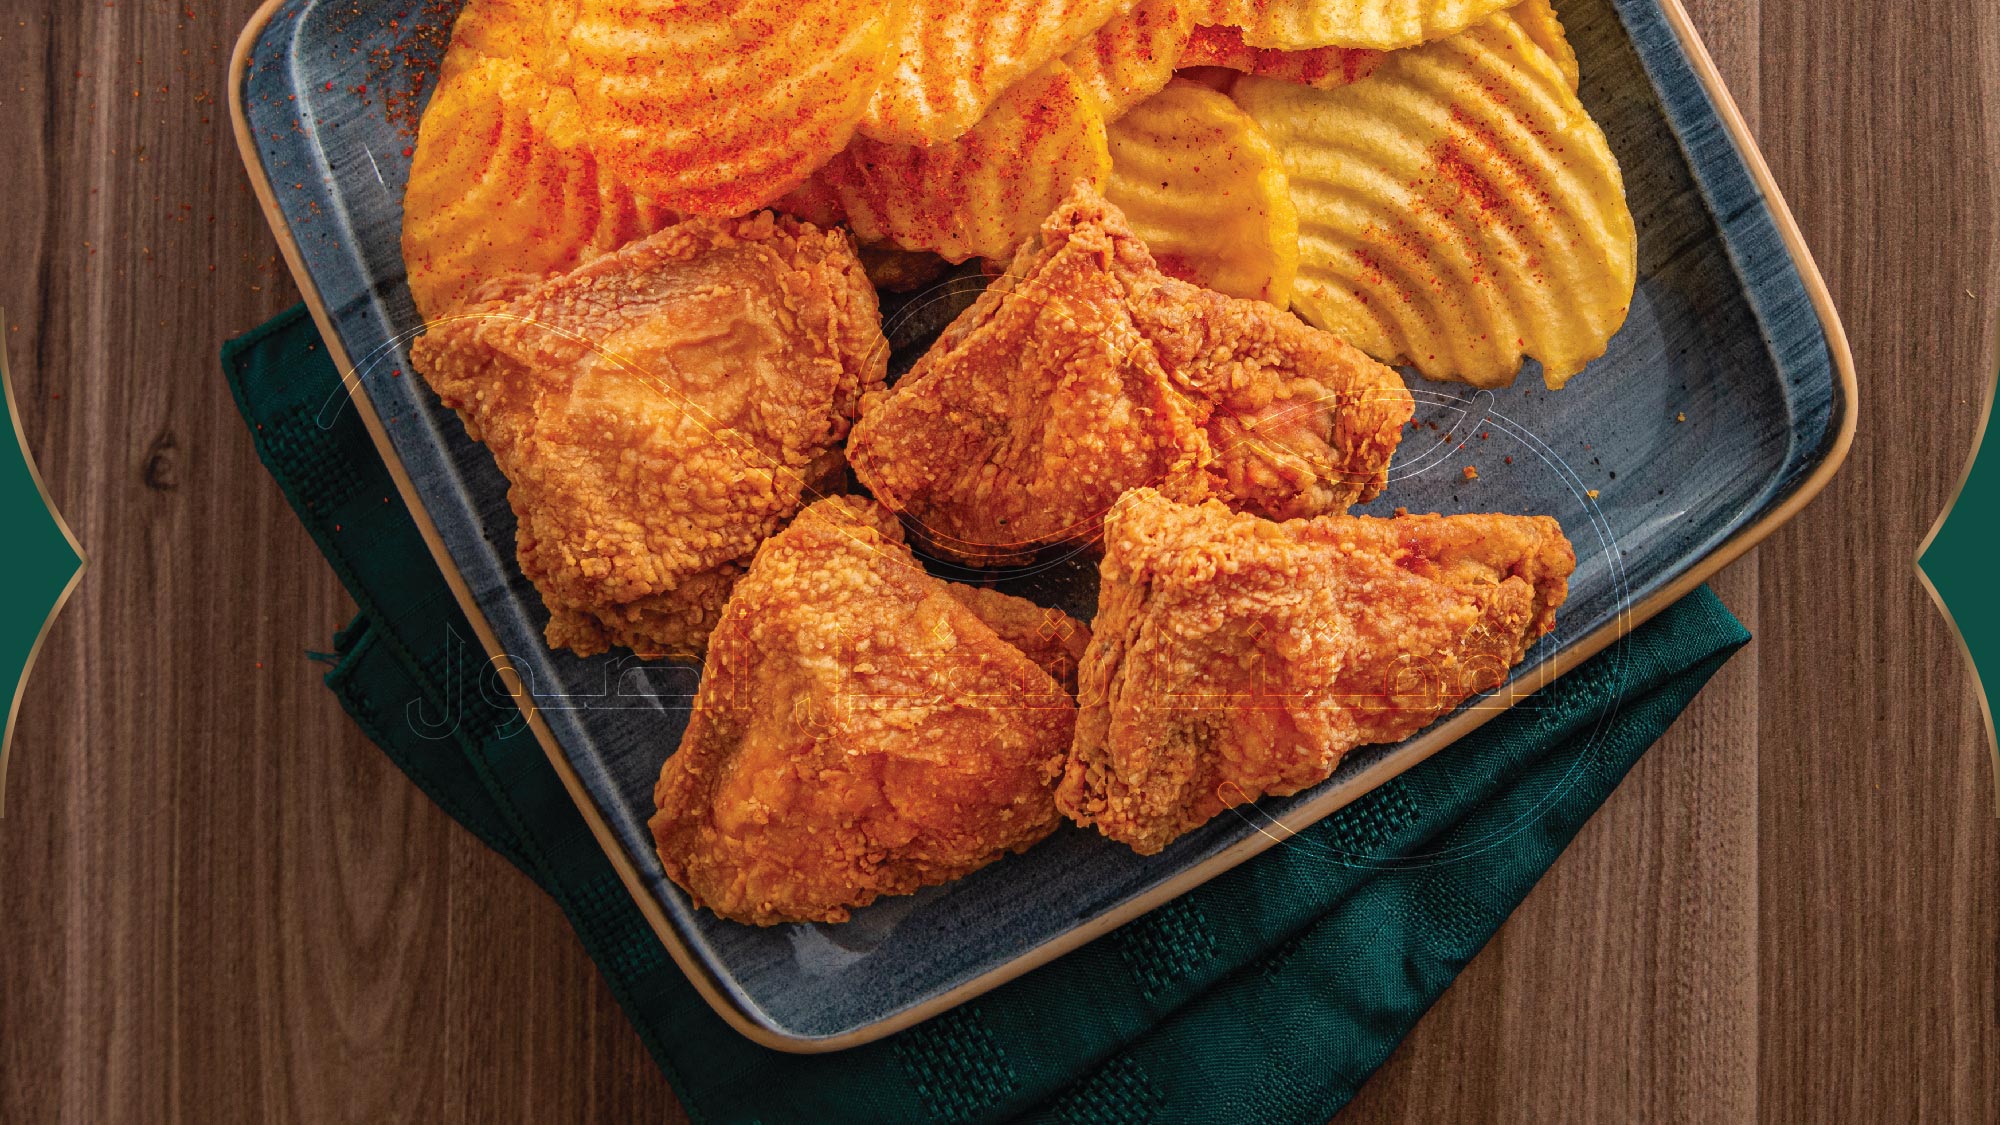 How Do You Choose the Best Broasted Chicken? ​